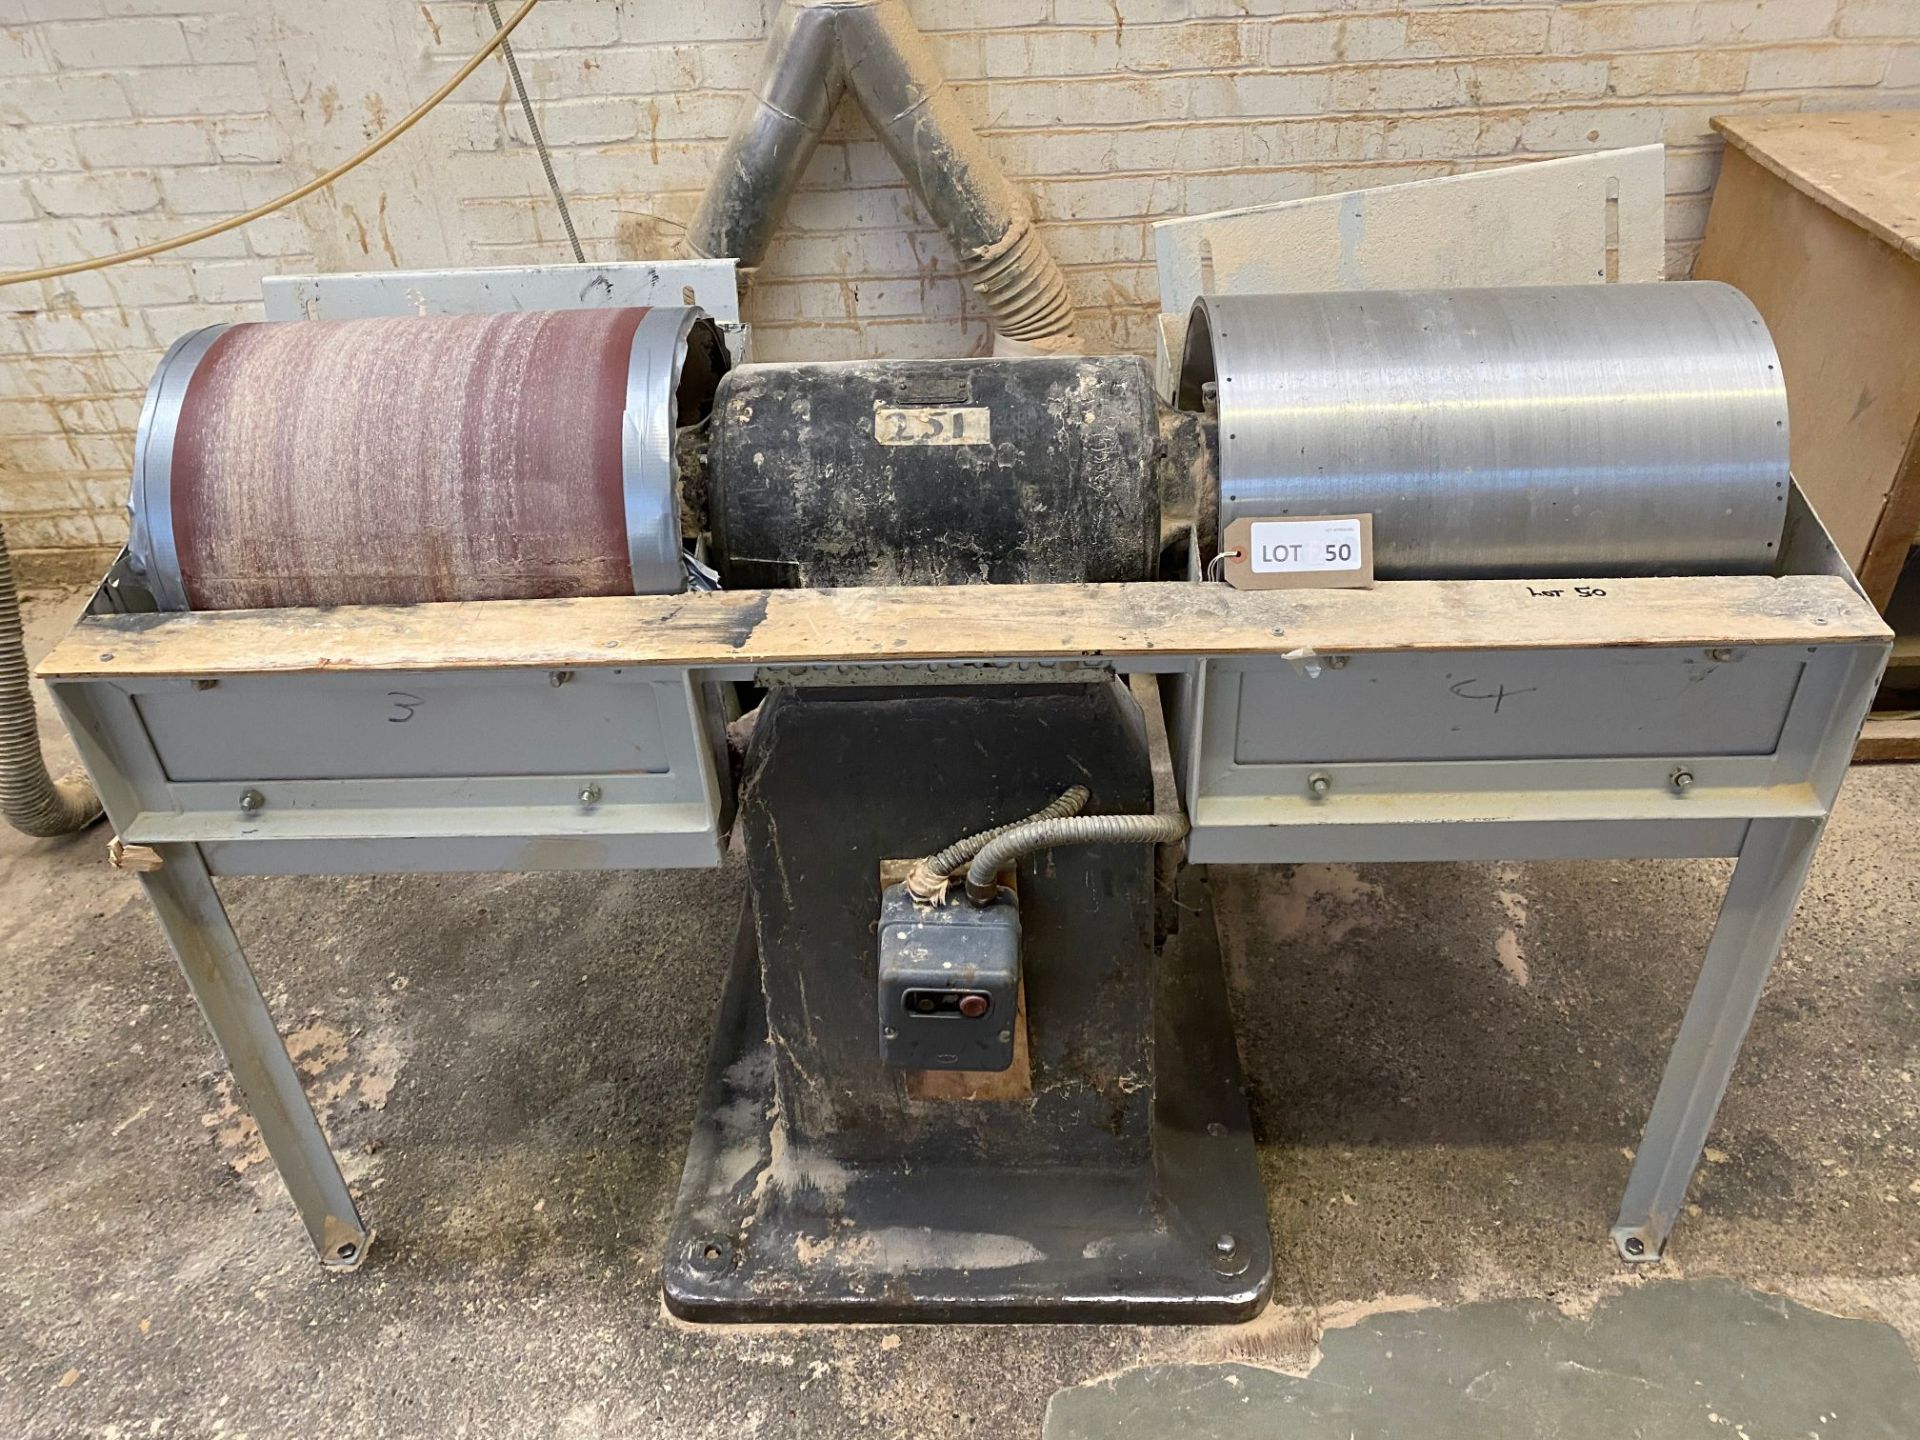 Unbadged twin-end linisher with two 18" x 14" hard drums